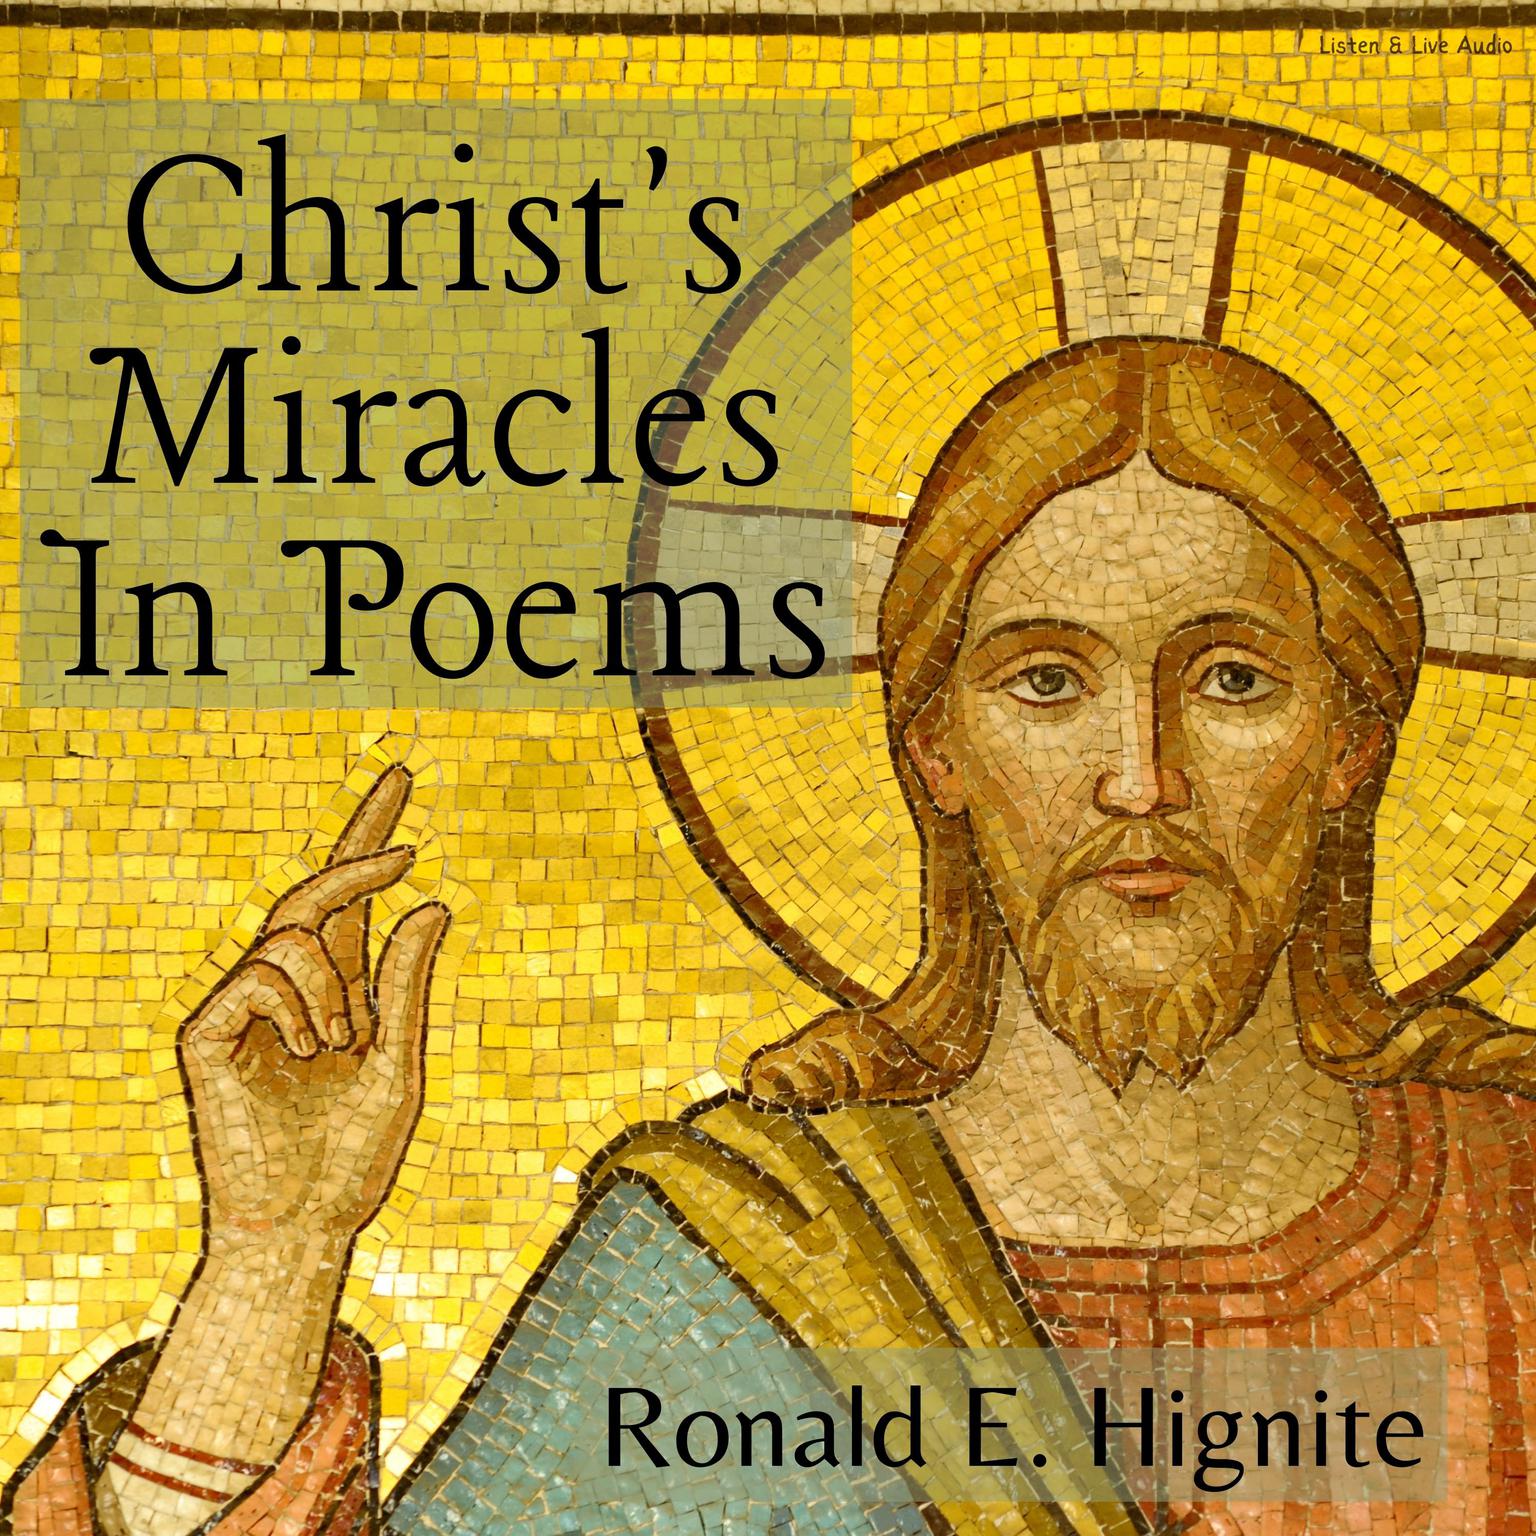 Christs Miracles In Poems Audiobook, by Ronald E. Hignite